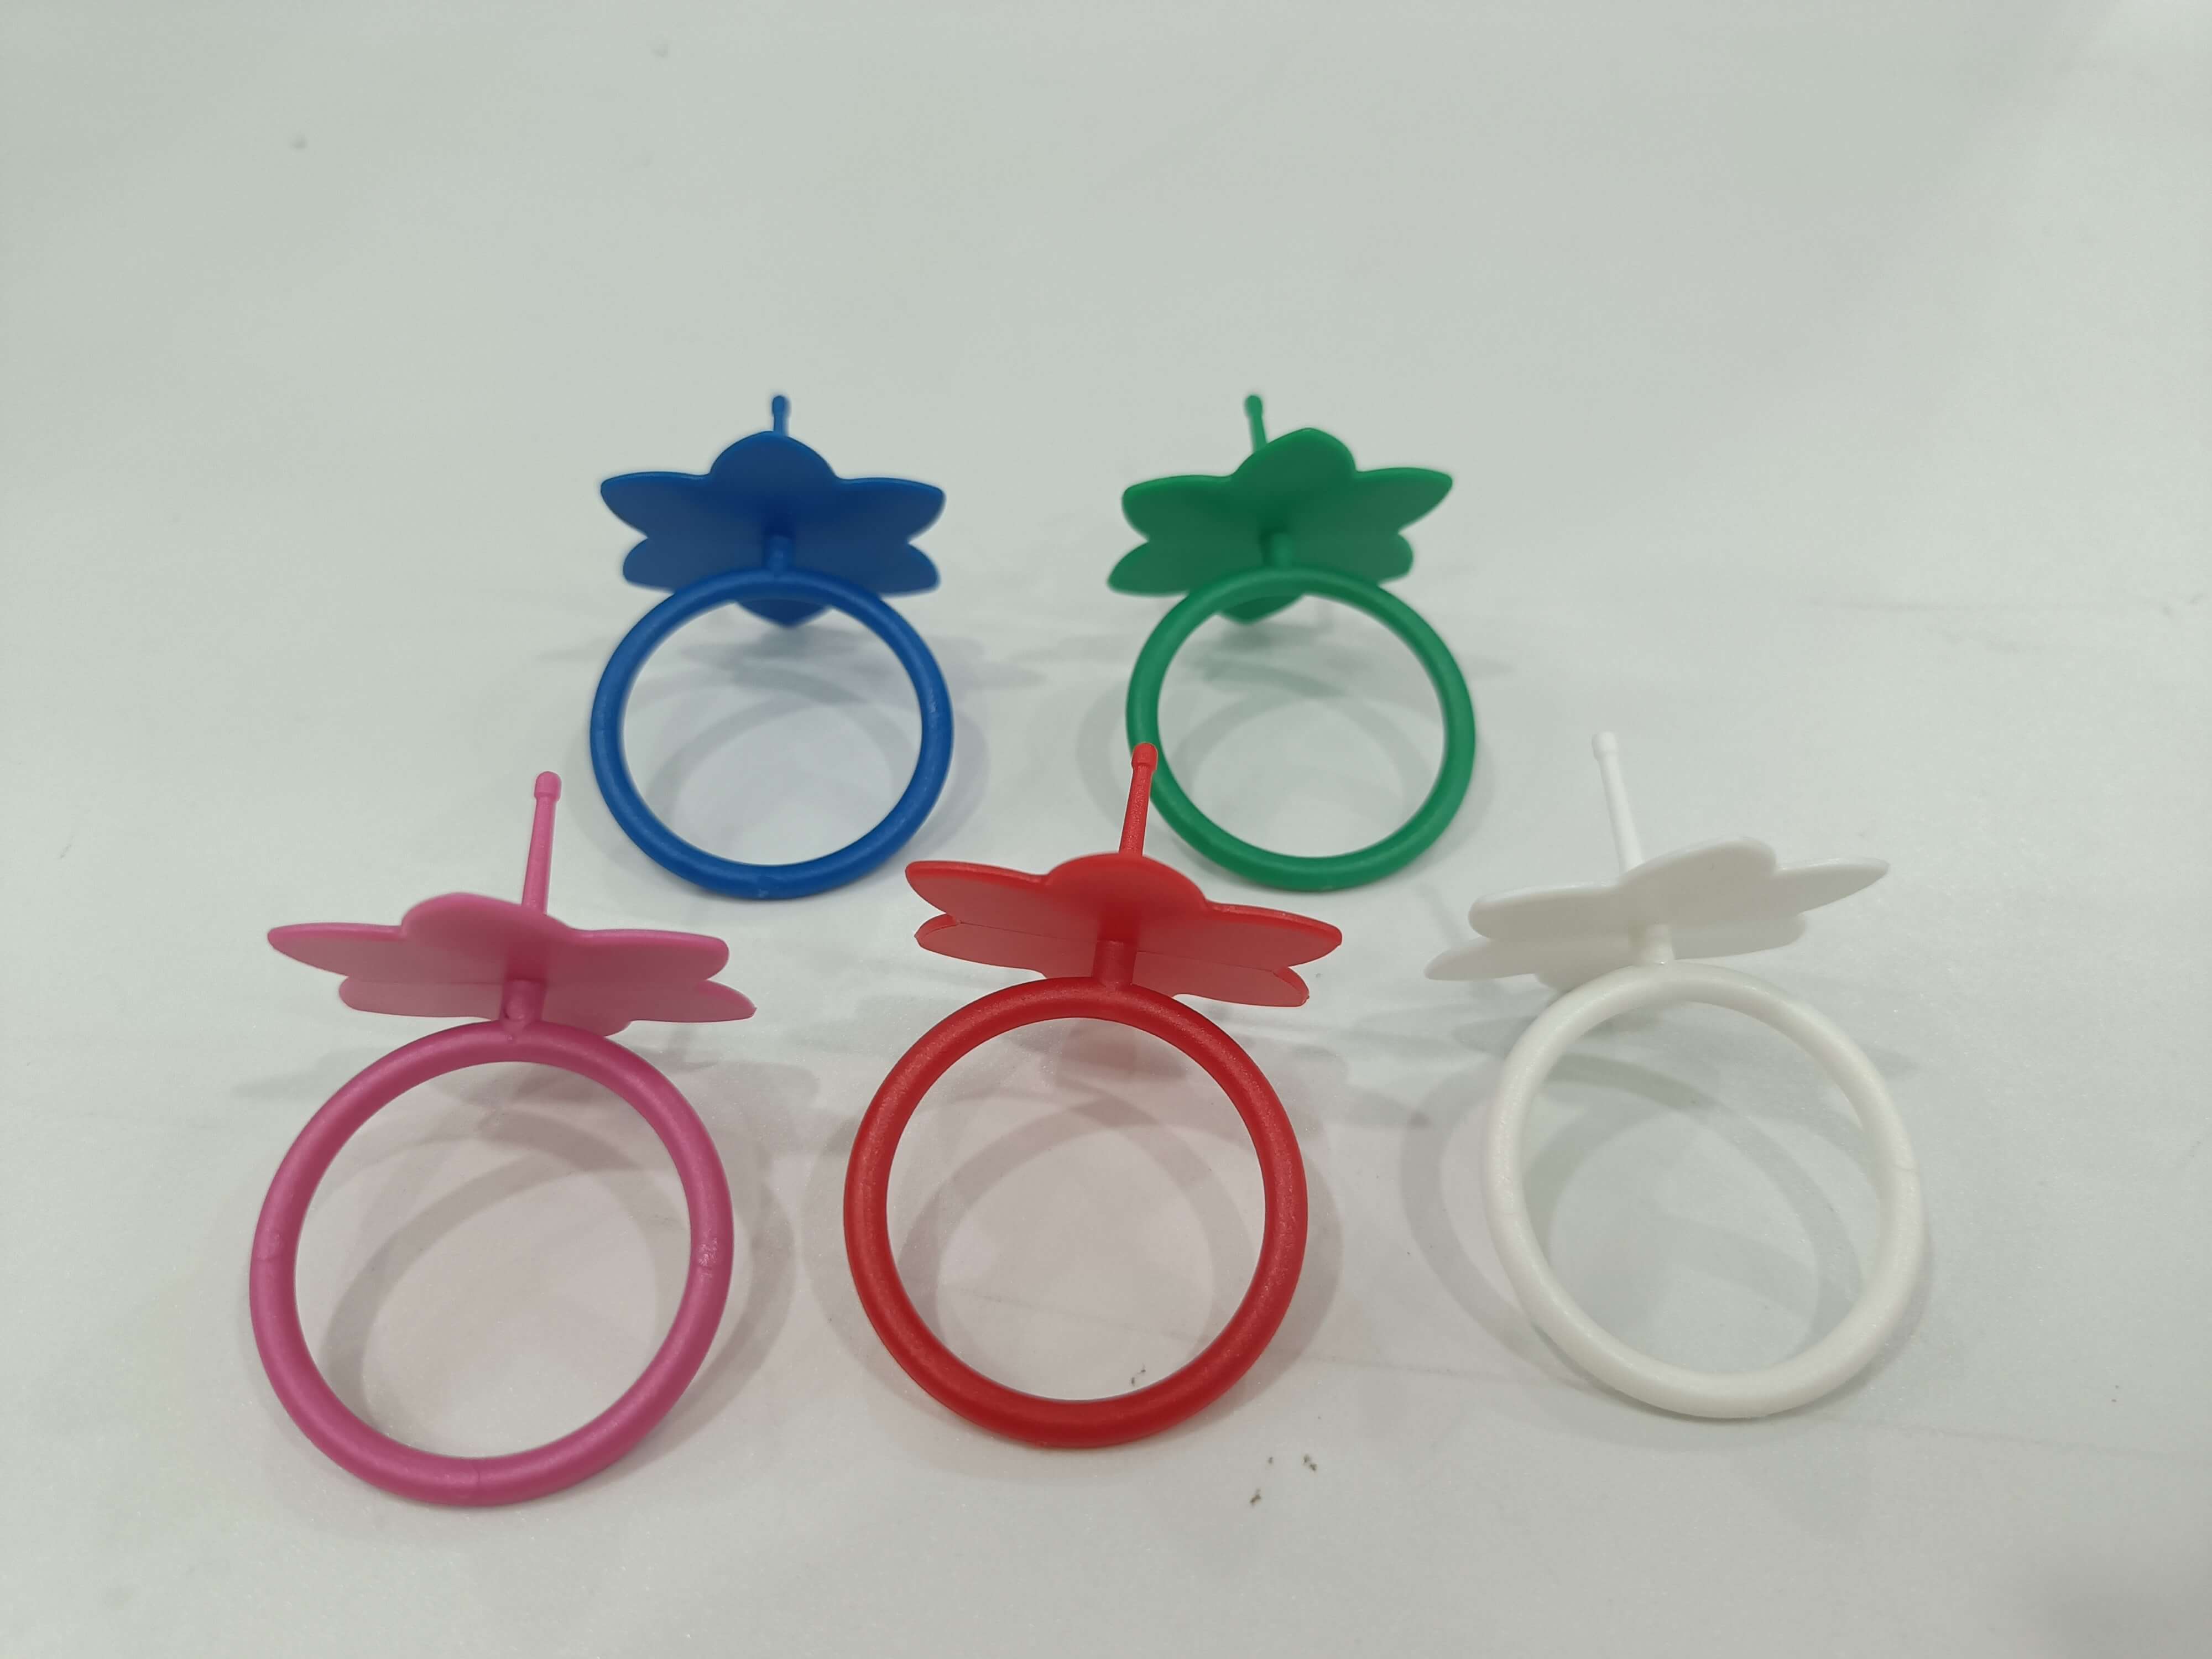 Precision Plastic Injection Molding A One-Stop Solution for Candy Holders (7)